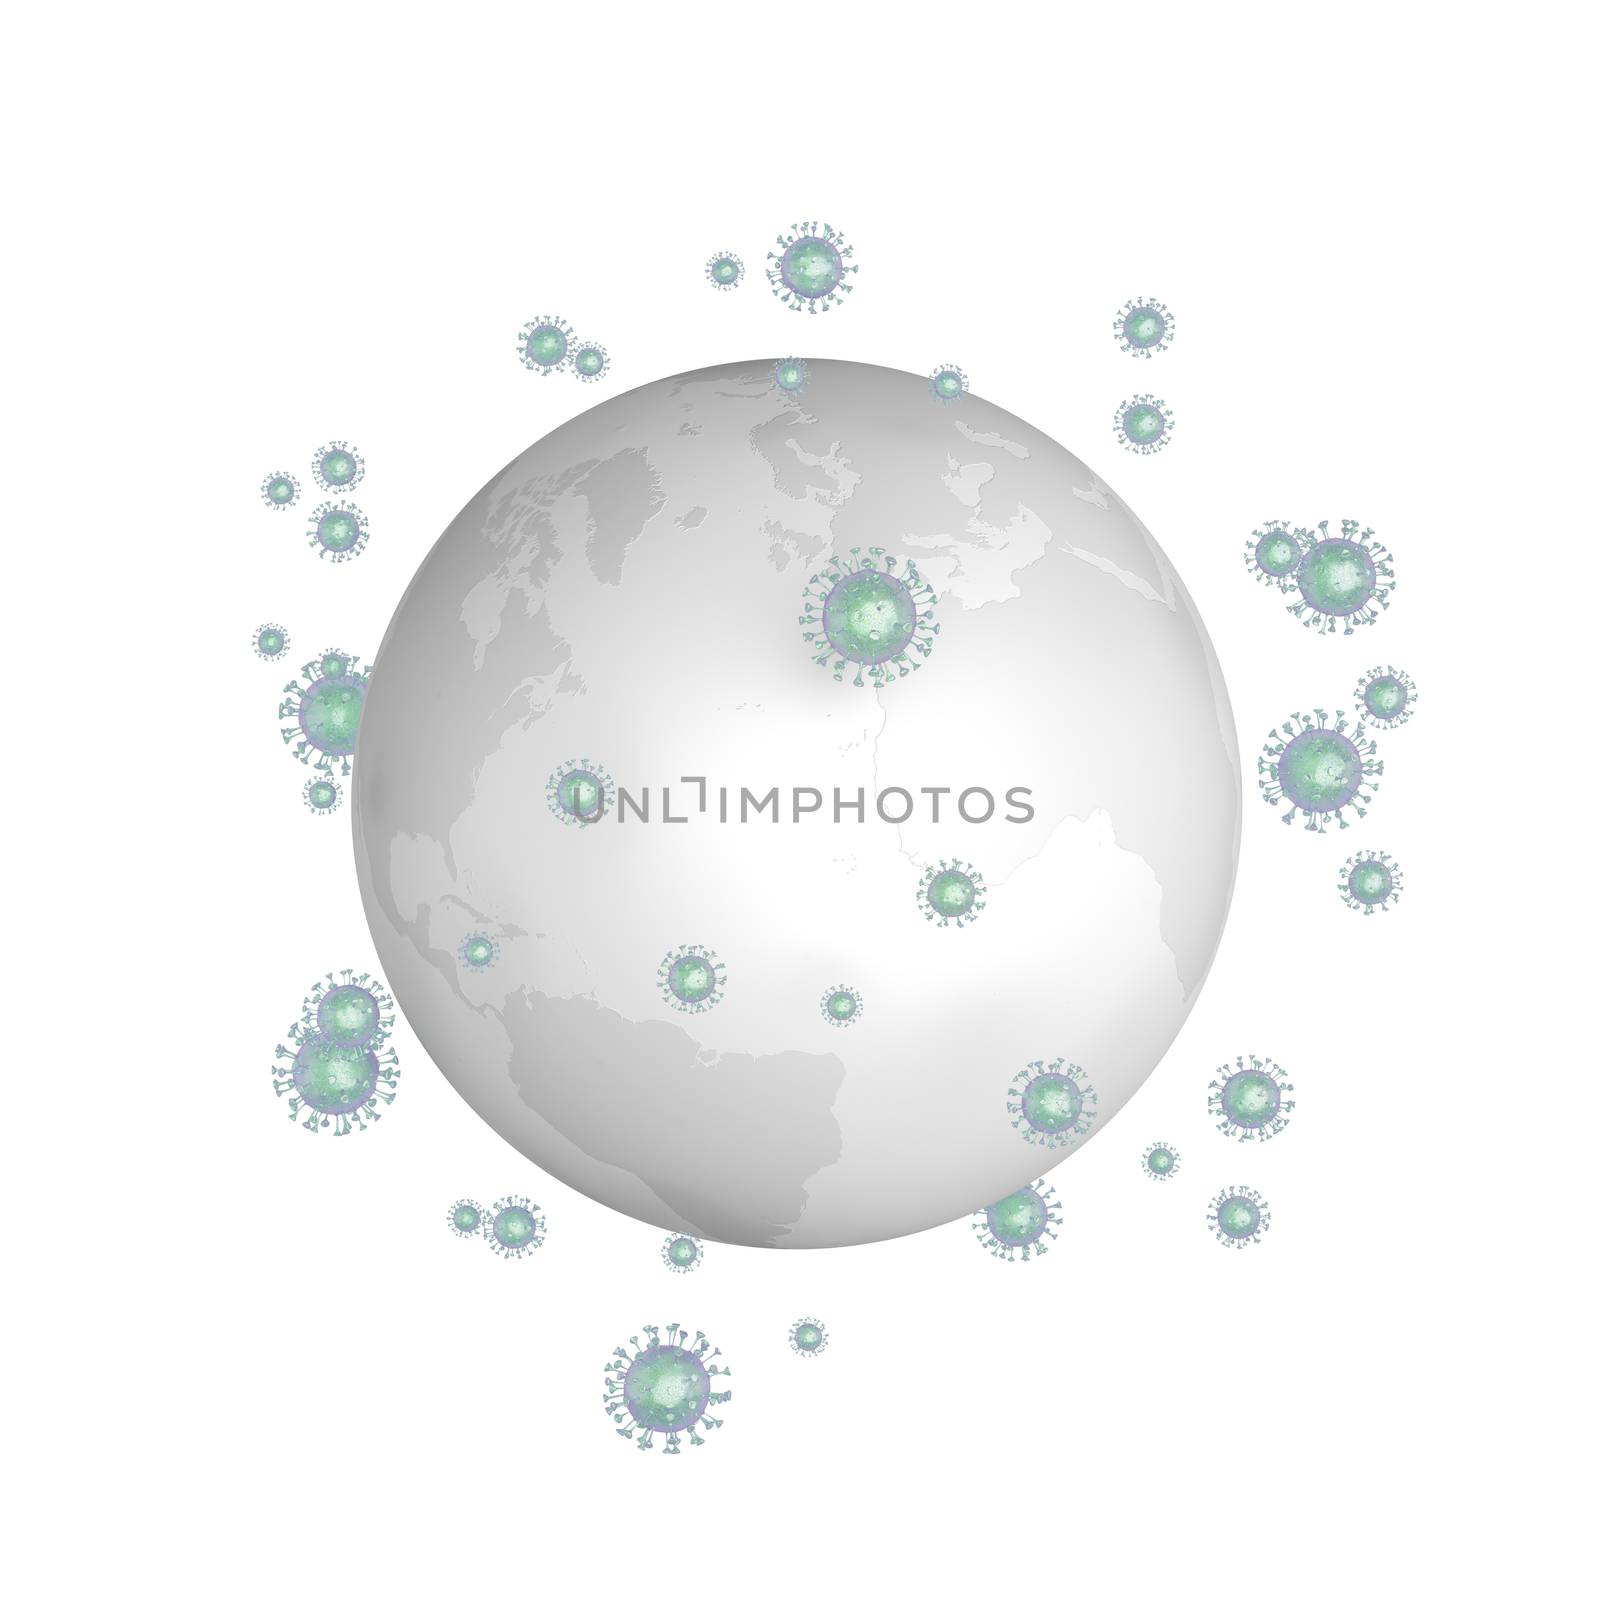 Many viruses around the earth by magraphics